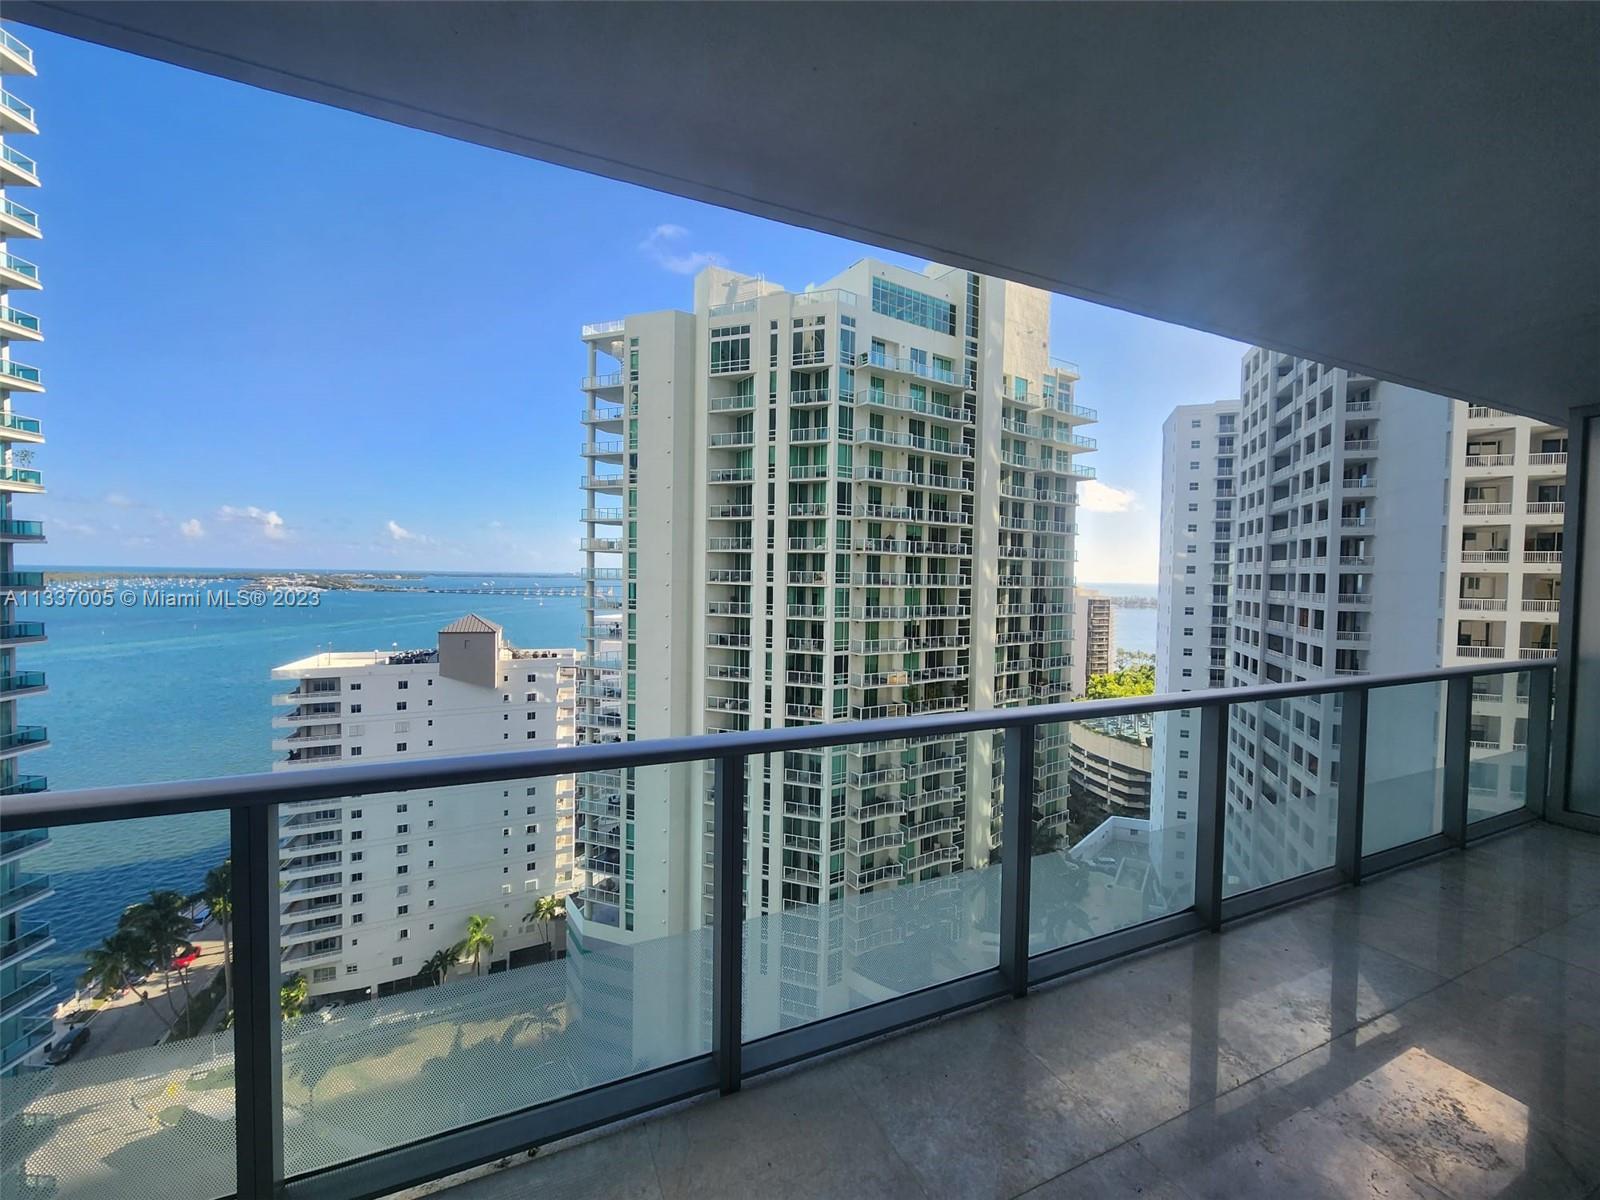 CALL/TEXT 3055707409 TO VIEW. 1/1 in the heart of Brickell. Open the door to marble floors and breathtaking water views. Long balcony, Laundry in unit, modern appliances, large bathroom, building is modern and upscale with all amenities. Restaurants same block as the building, retail as well. Immediate move-in available.